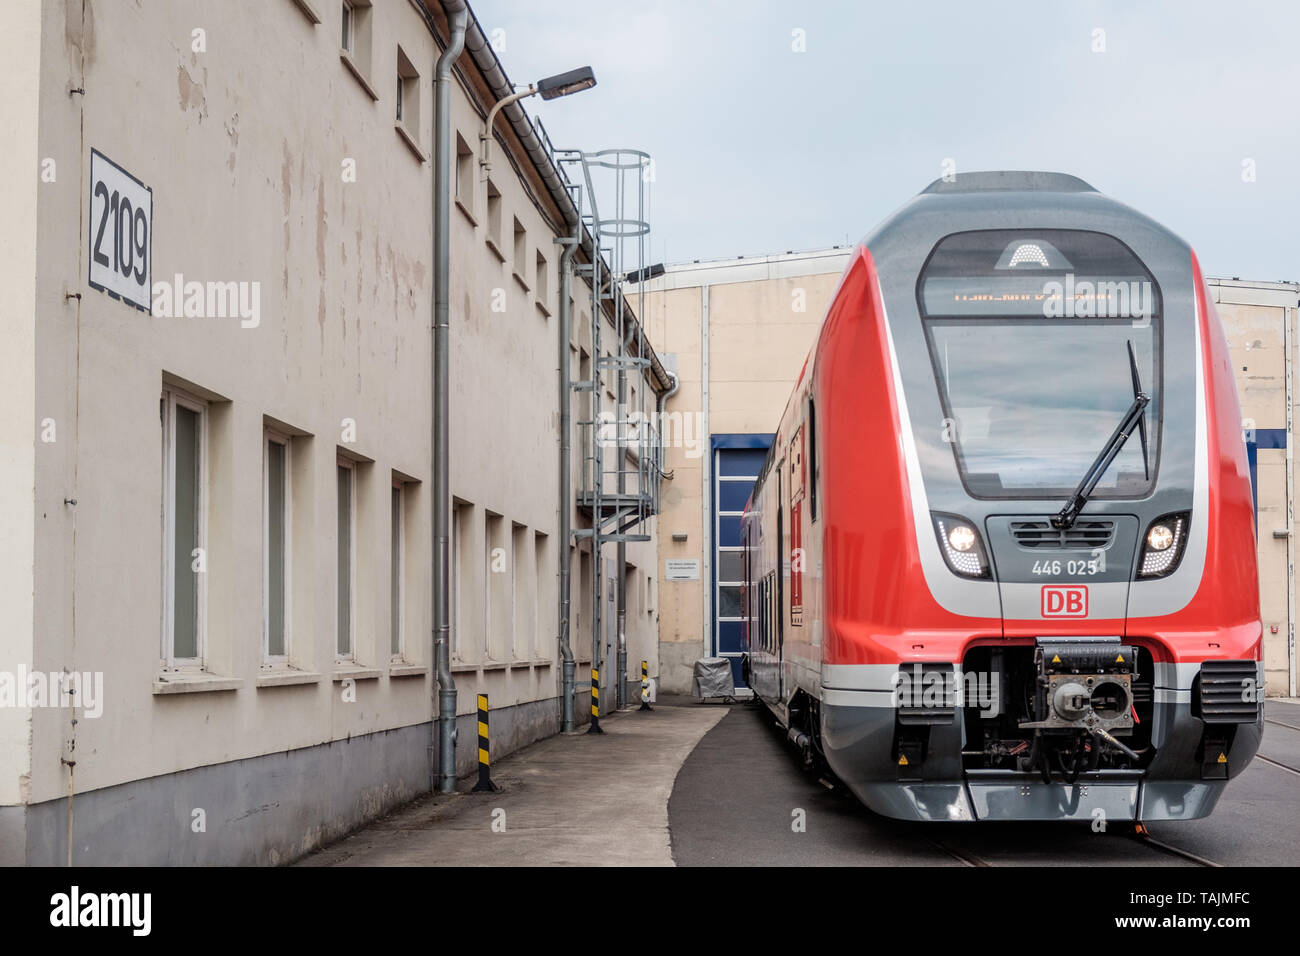 Görlitz, Germany, May 25, 2019 - End wagon of a double-deck railcar of the Twindexx type for Deutsche Bahn in the Bombardier plant in Görlitz. Stock Photo